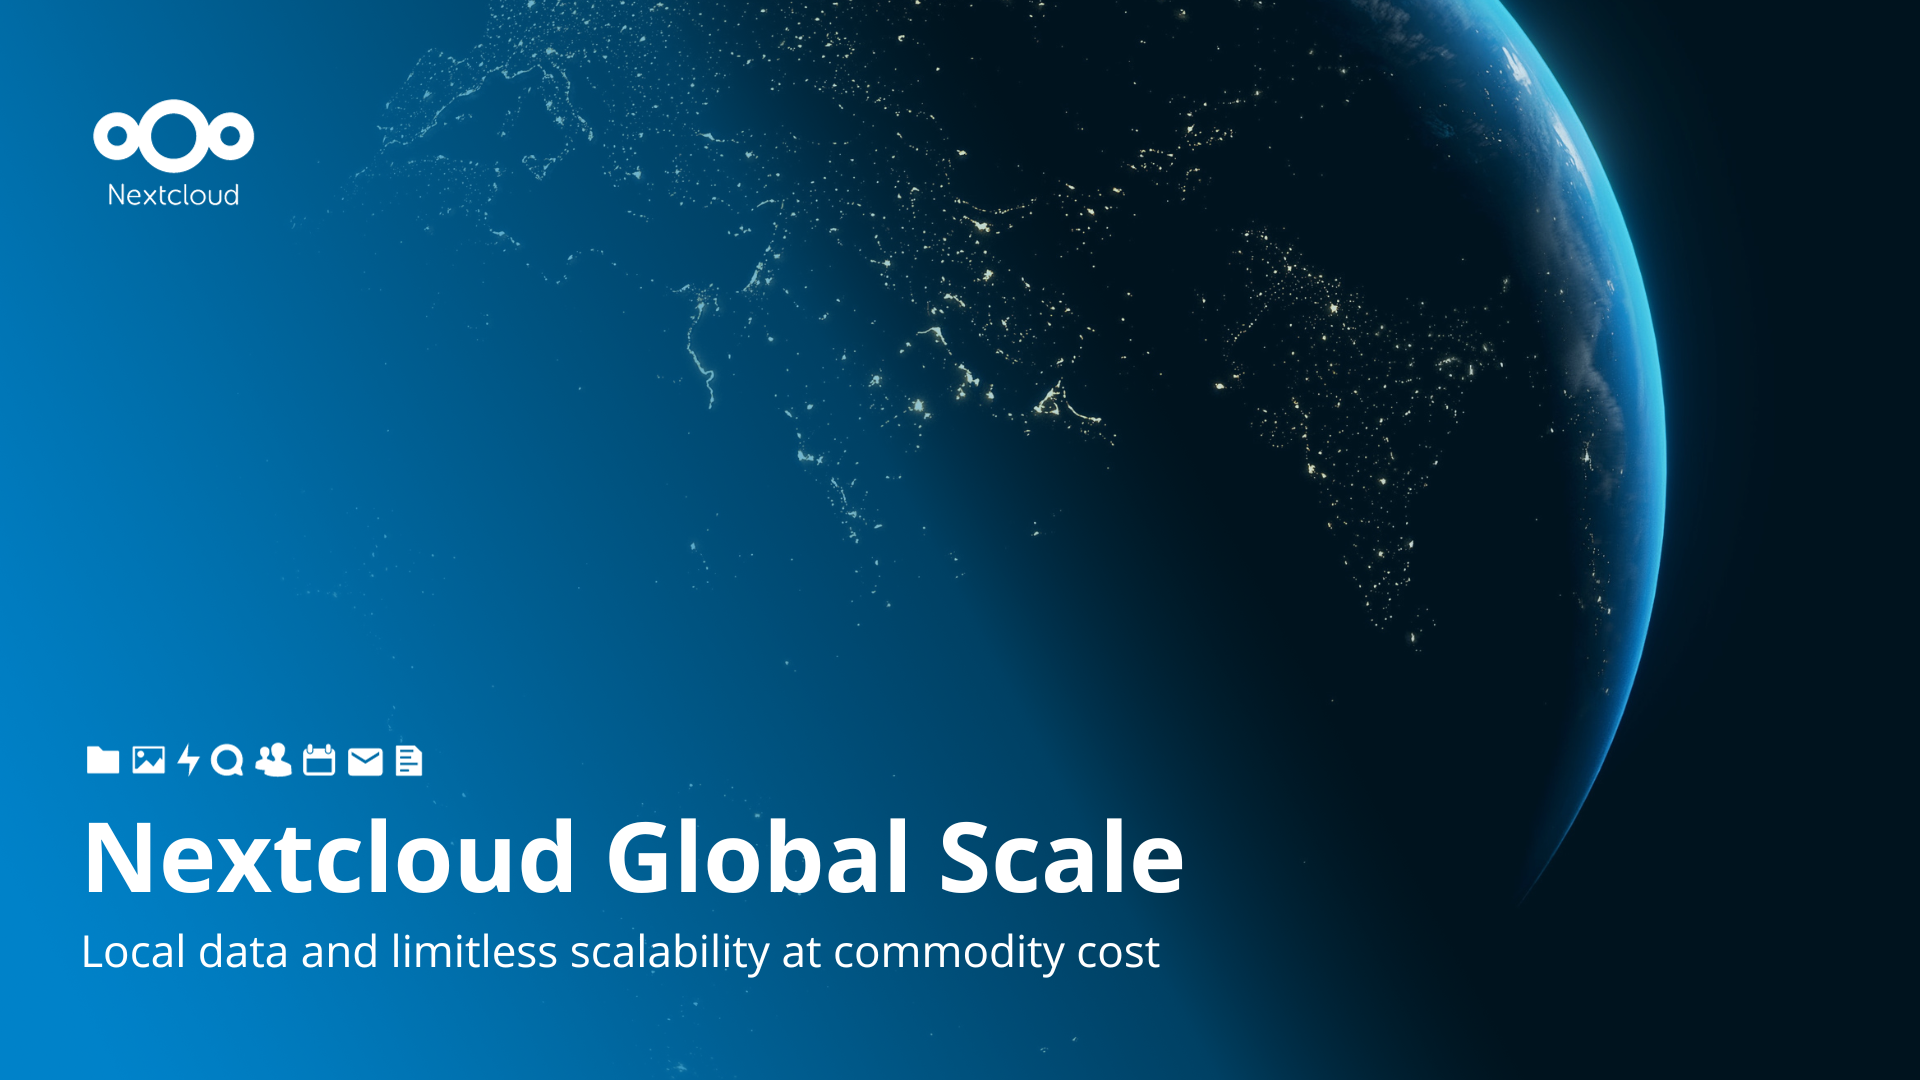 Nextcloud Global Scale: local data and limitless scalability at commodity cost